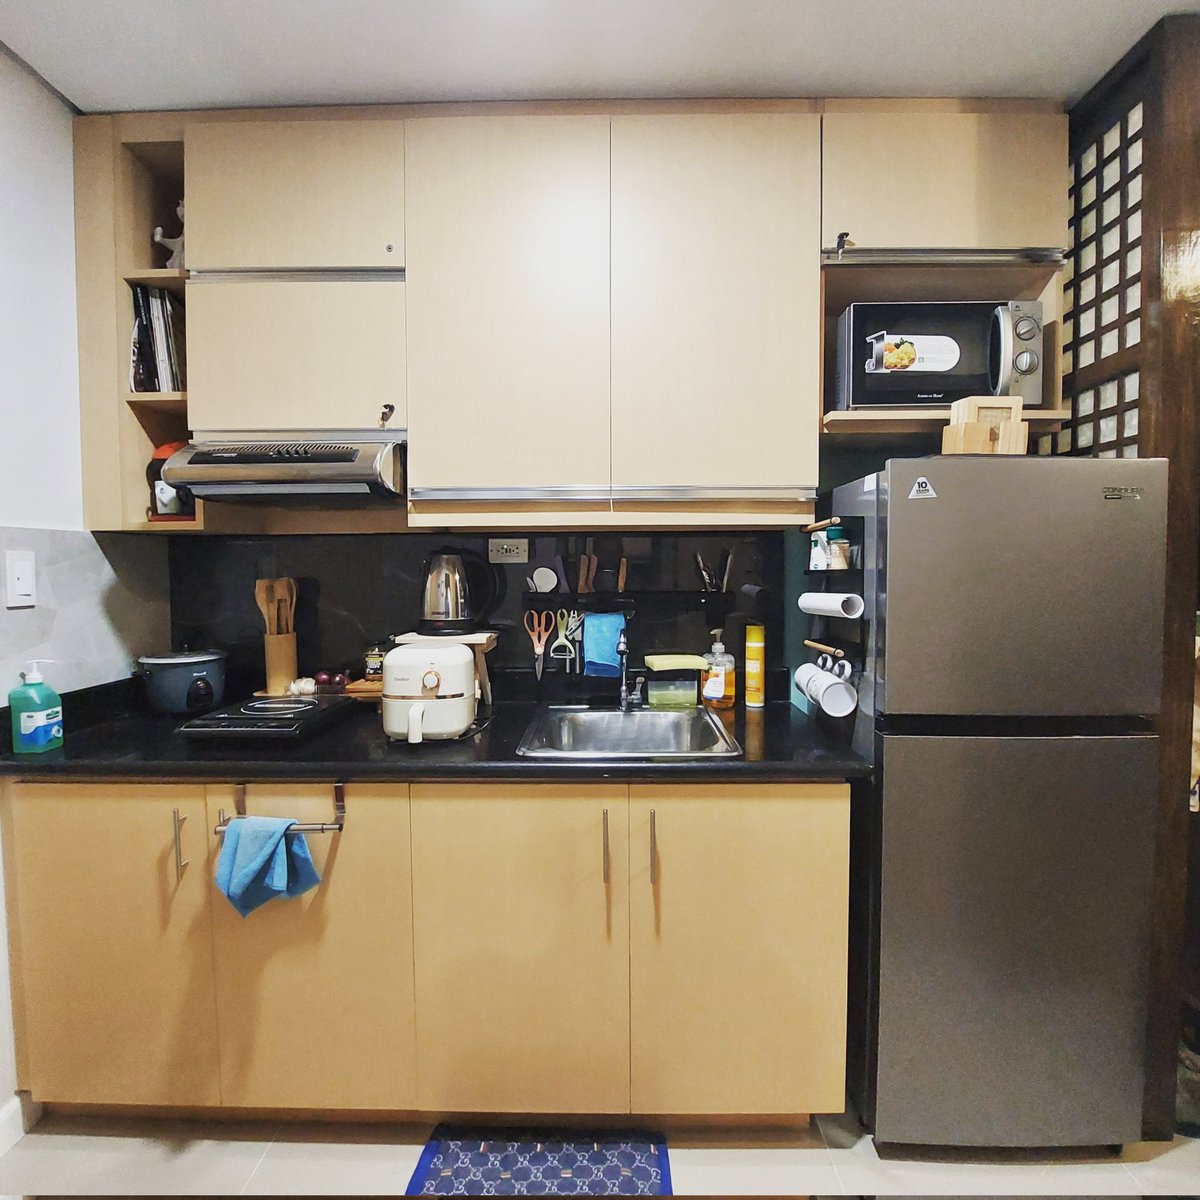 Our #kitchen  🤗
#2doorfridgefreezer  #microwave
#2LAirFryer #ricecooker #inductionstove 
#knives #cookingutensils #spoonandfork #dinnerset
#coffeemaker  #cookingpots #electrickettle and many more

#staycationinmanila #staycationinthephilippines #staycation #bulahansuites